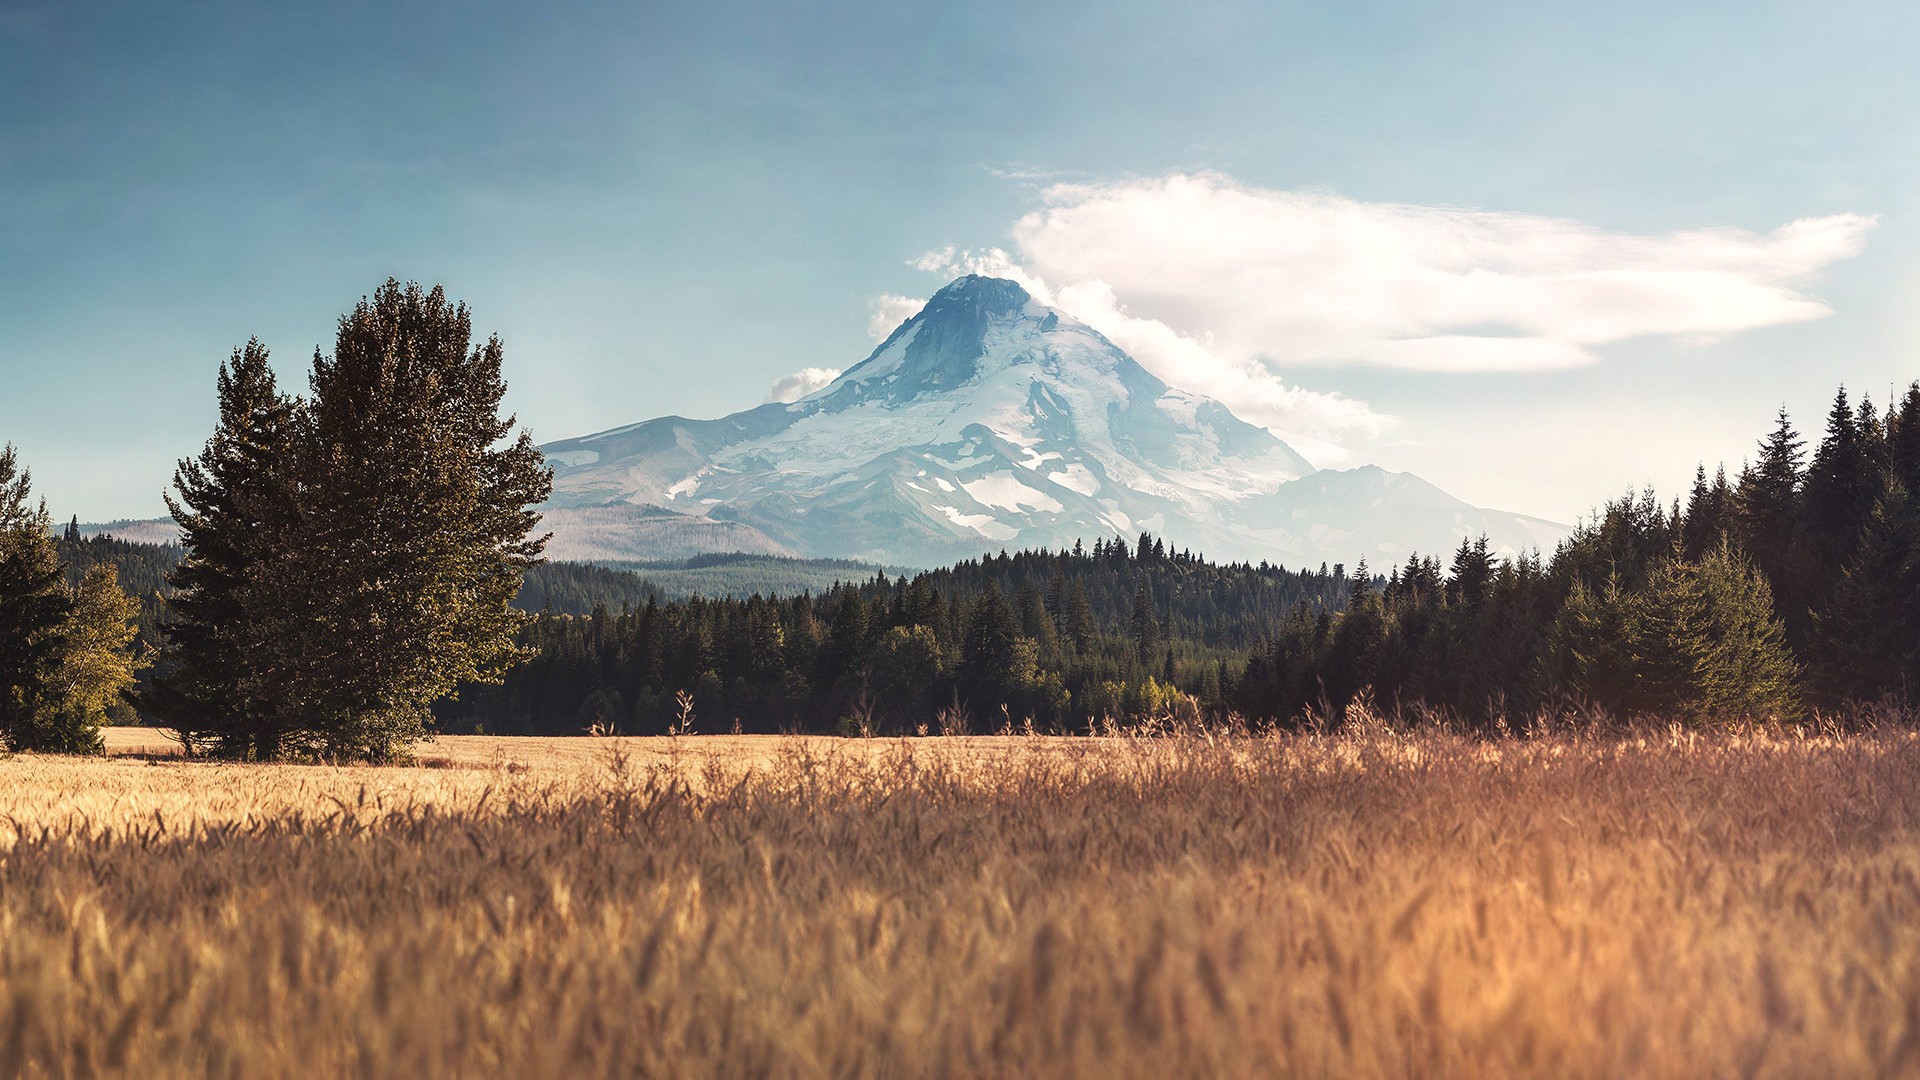 Trees Mount Hood Photo Manipulation Field Mountains Clouds Forest Oregon 1920x1080